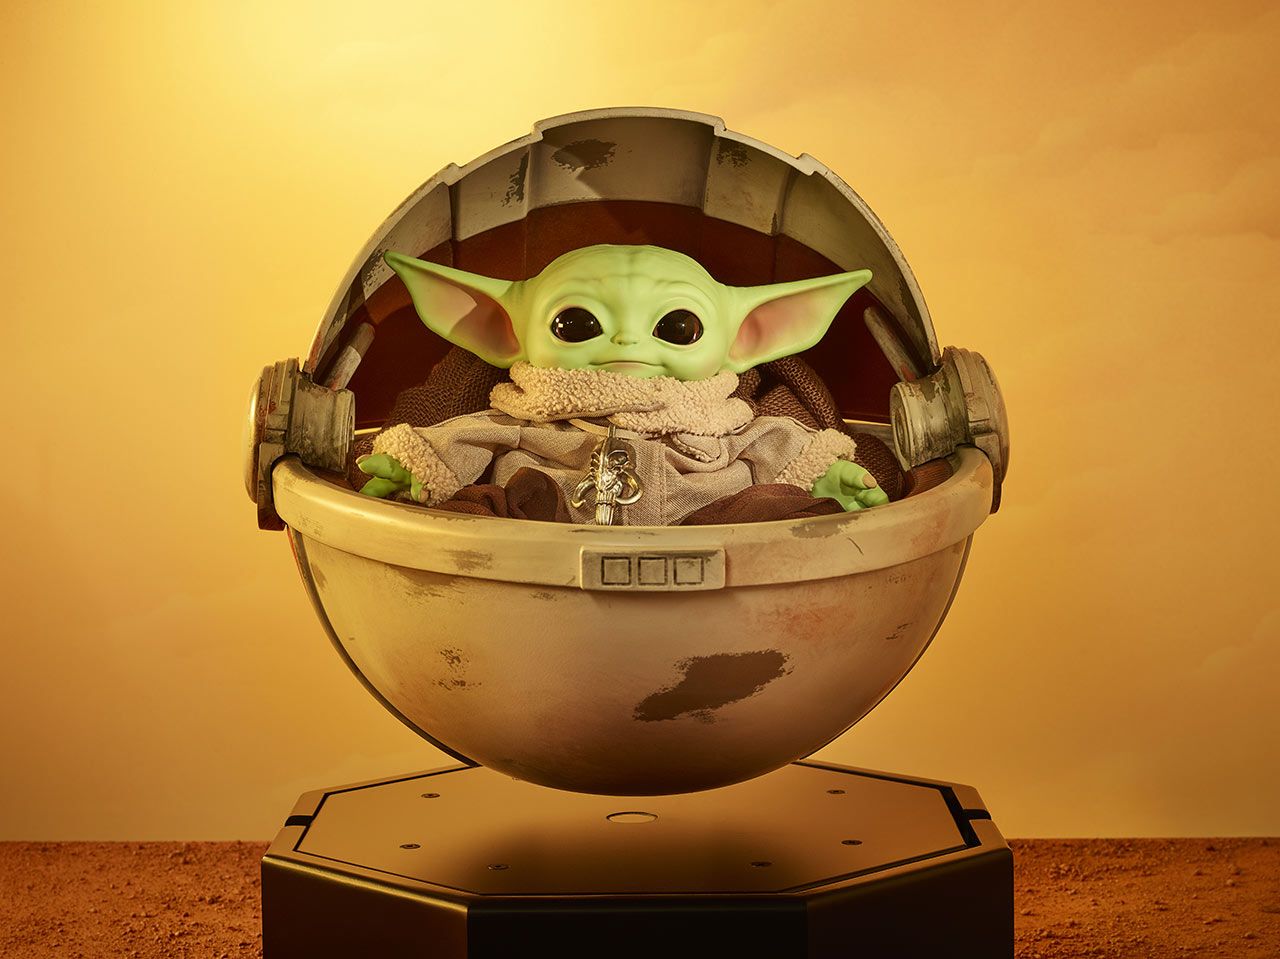 You Can Bring Home a Life Size Baby Yoda It'll Cost You Over $000